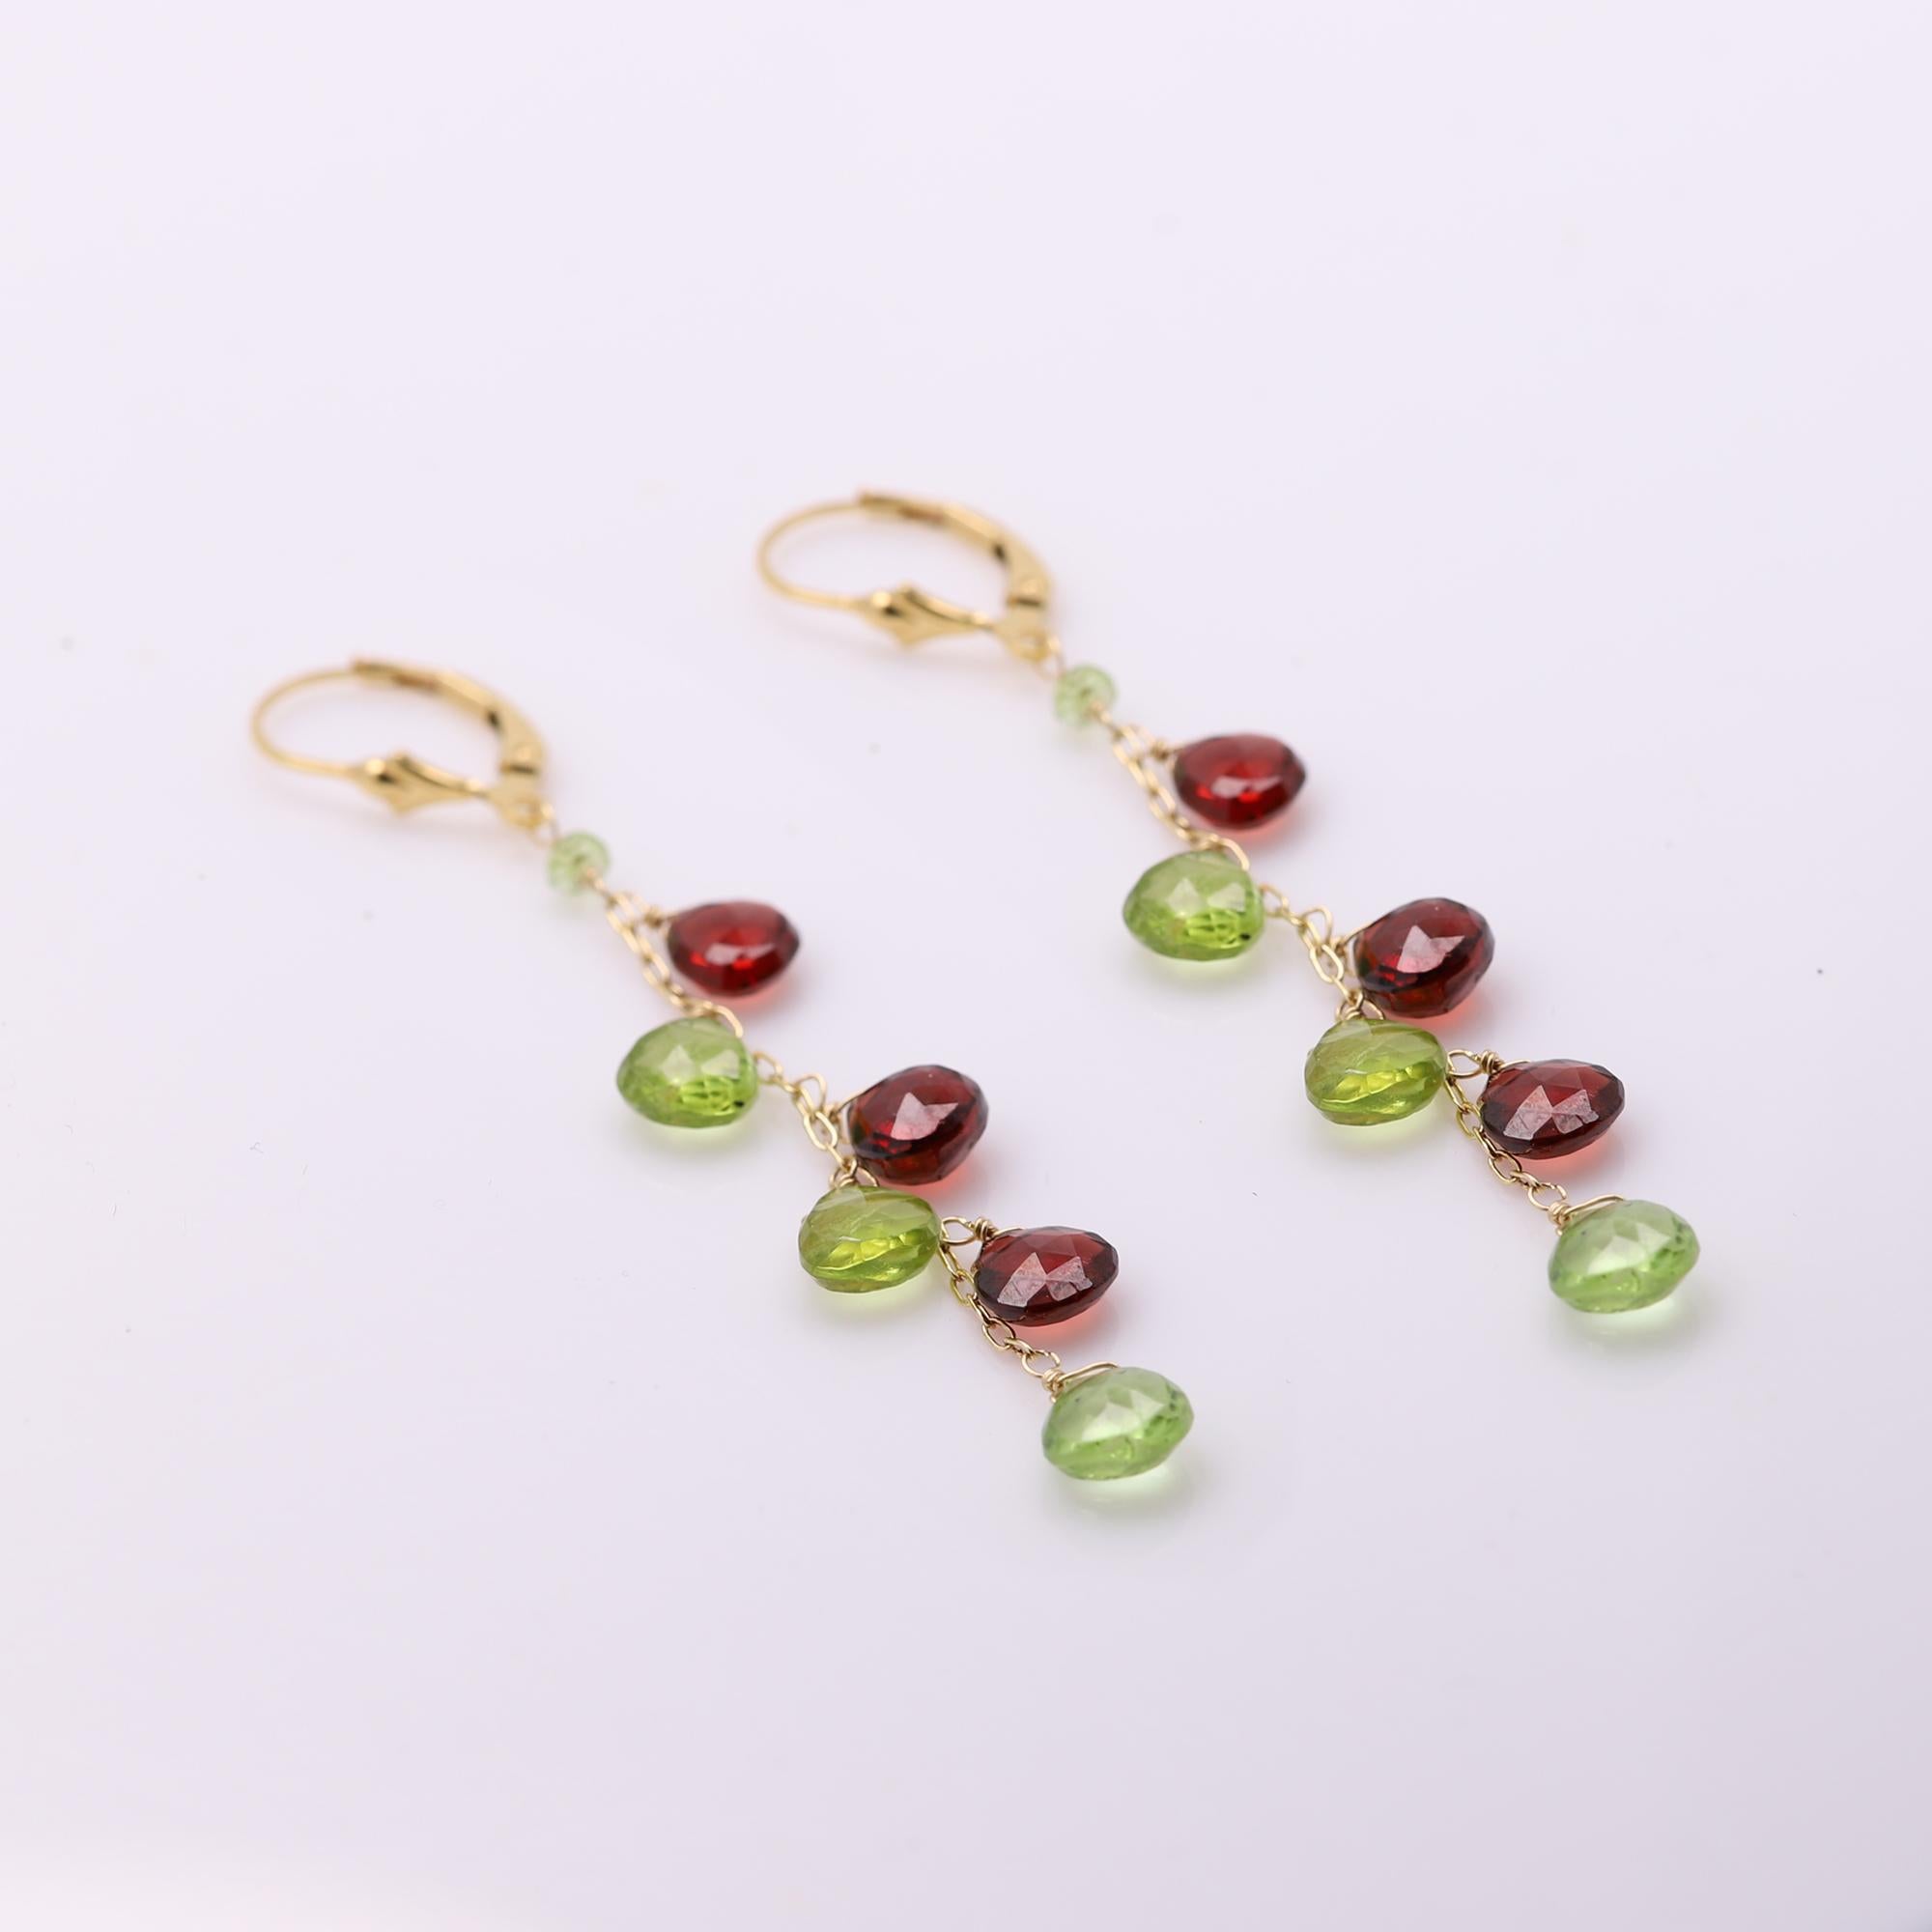 Dangling Earrings Multi Color Semi Precious Gems 14 Karat Yellow Gold In New Condition For Sale In Brooklyn, NY